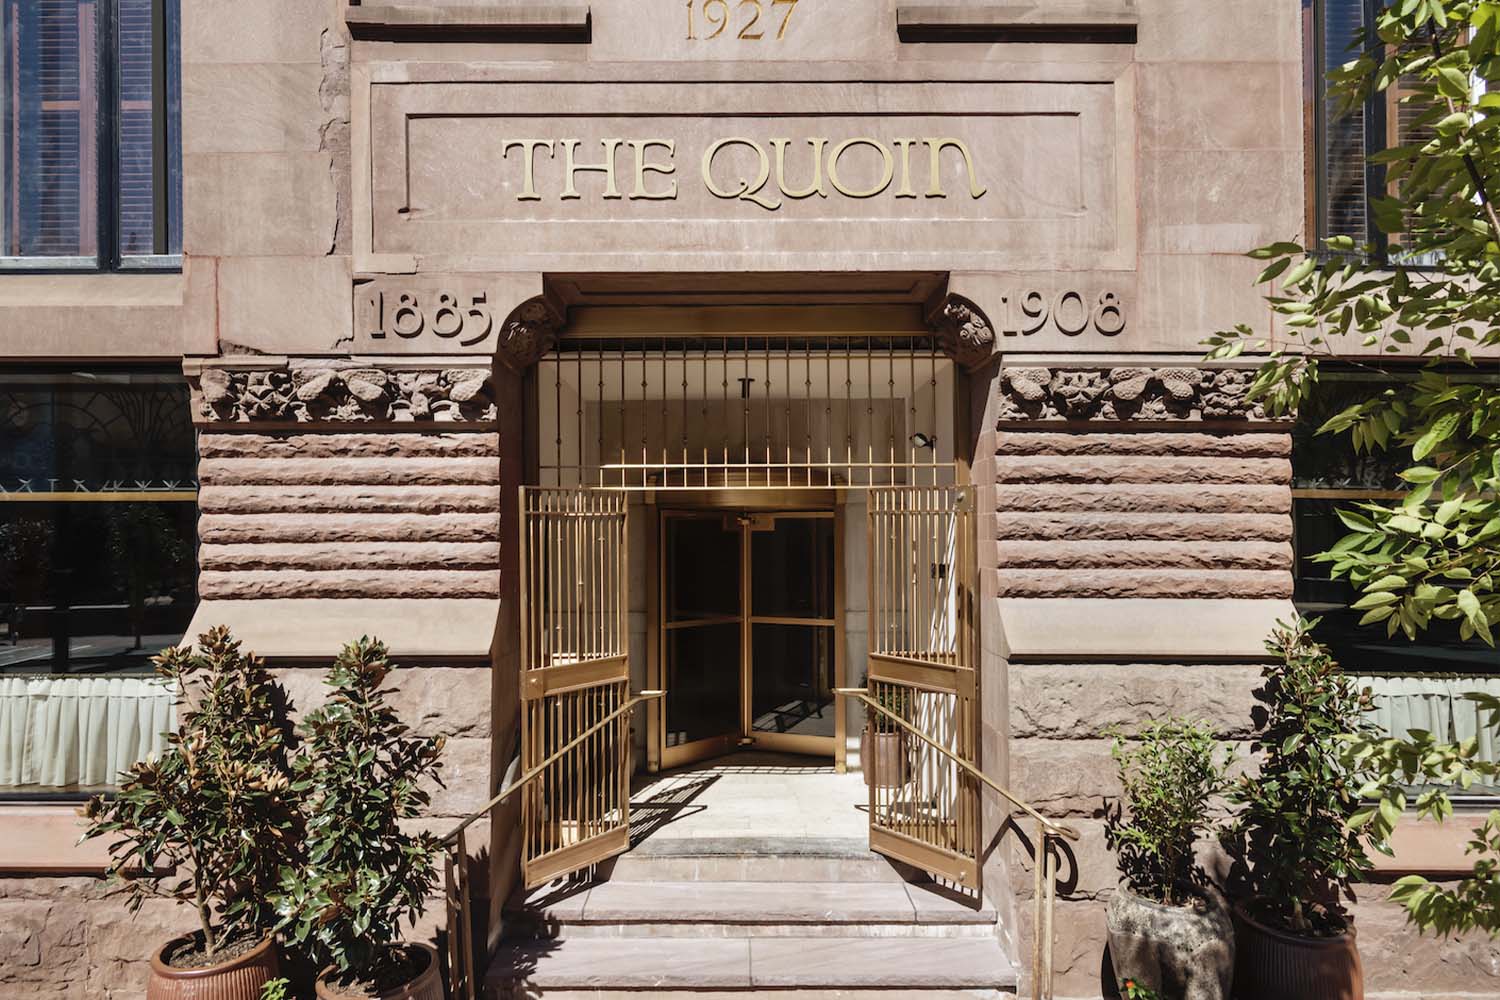 The Quoin